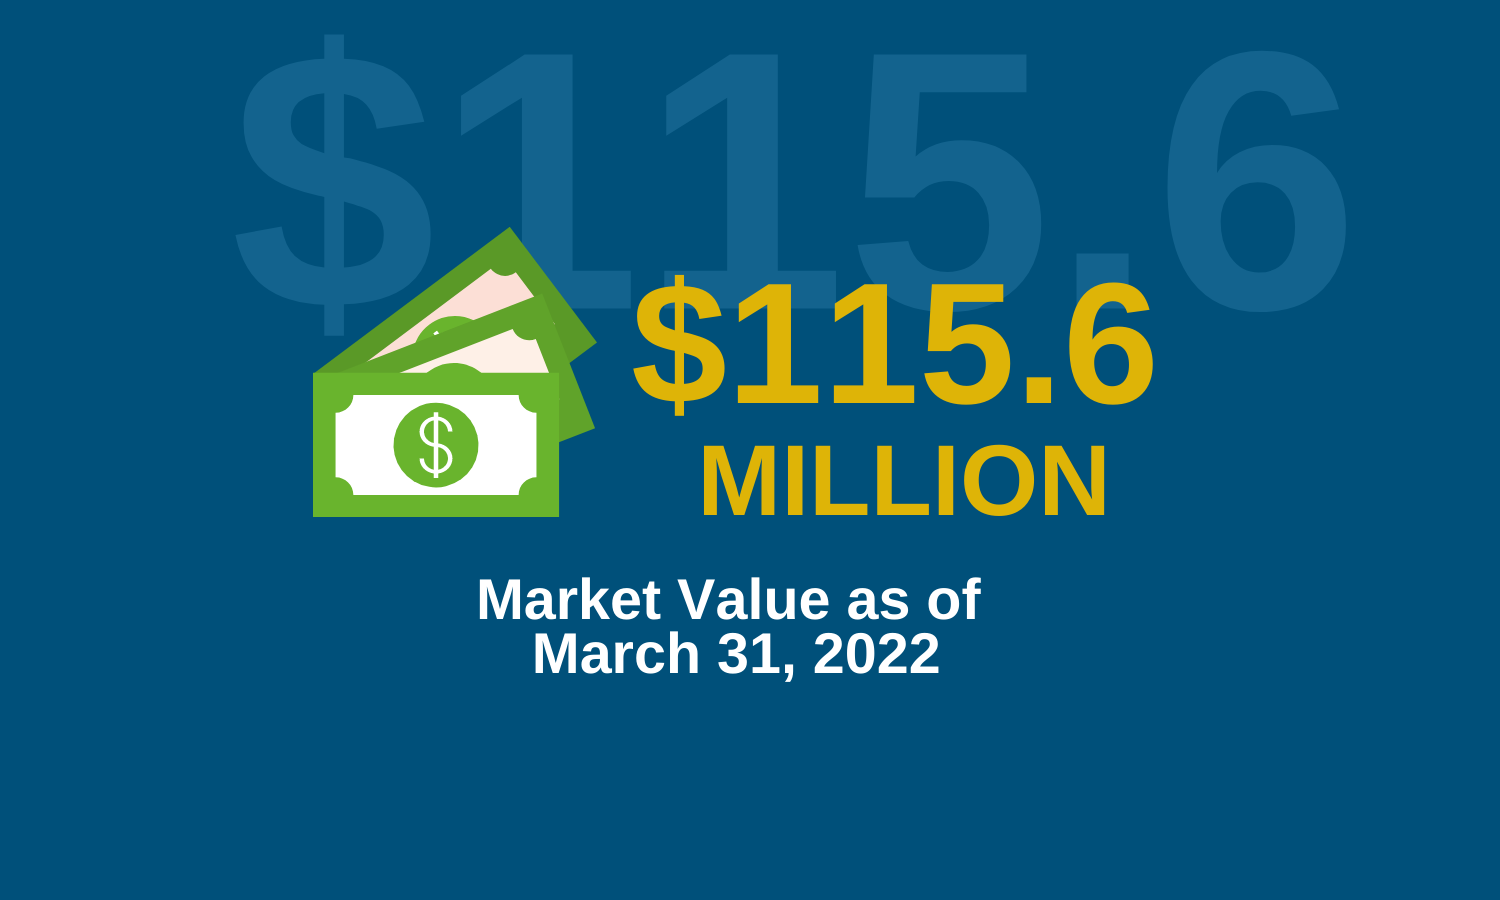 Graphic describing the market value at $115.6 million dollars as of March 31, 2022.